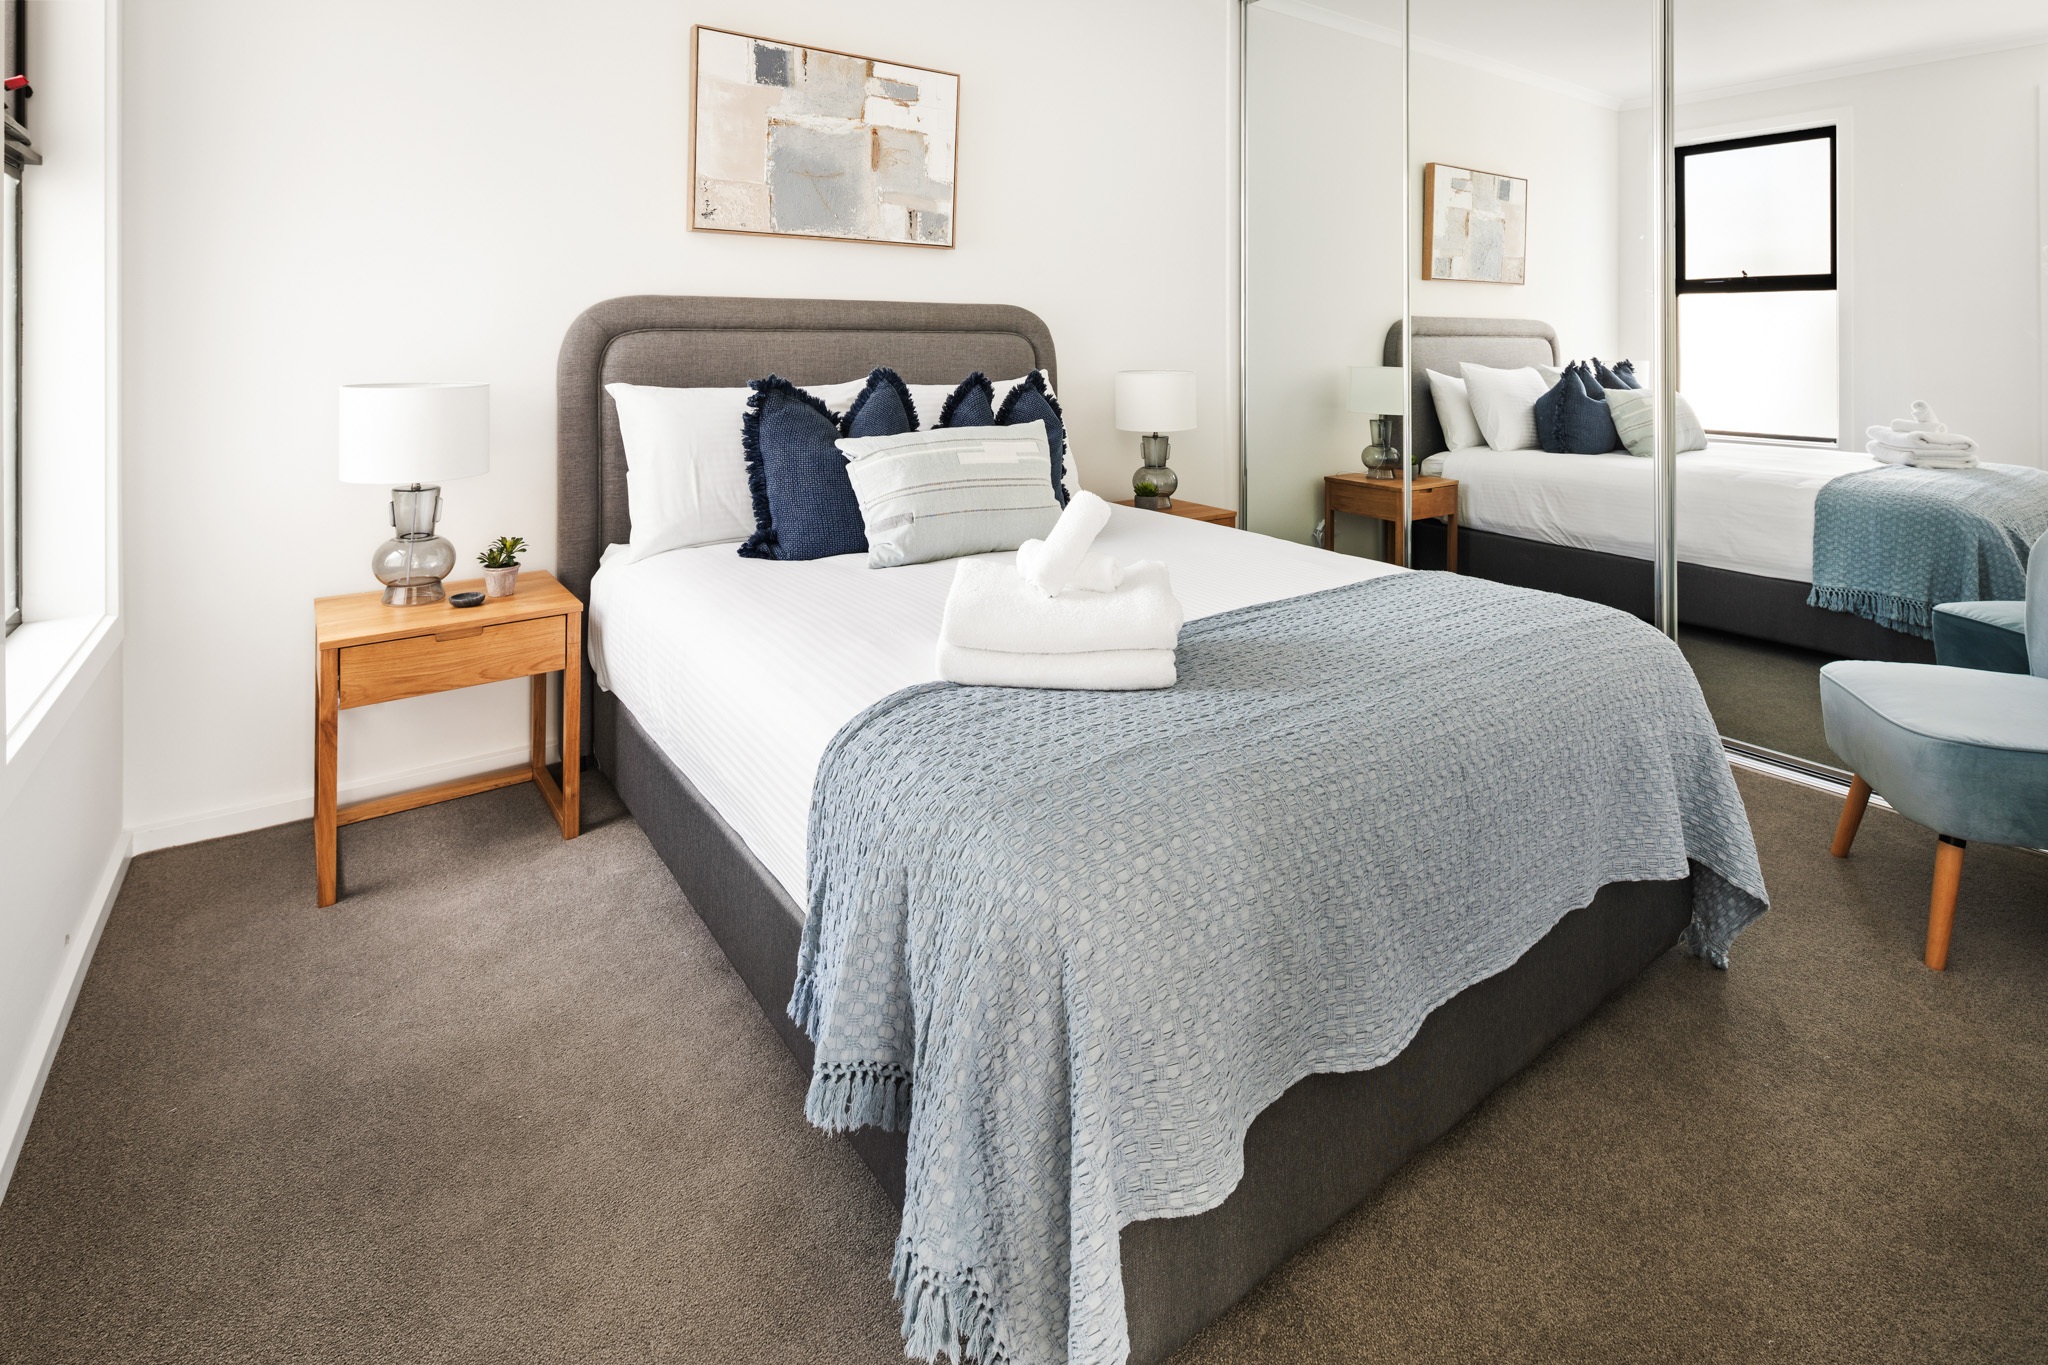 Bedroom - Two Bedroom Apartment - Urban Rest - Clare Street Apartments - Port Adelaide